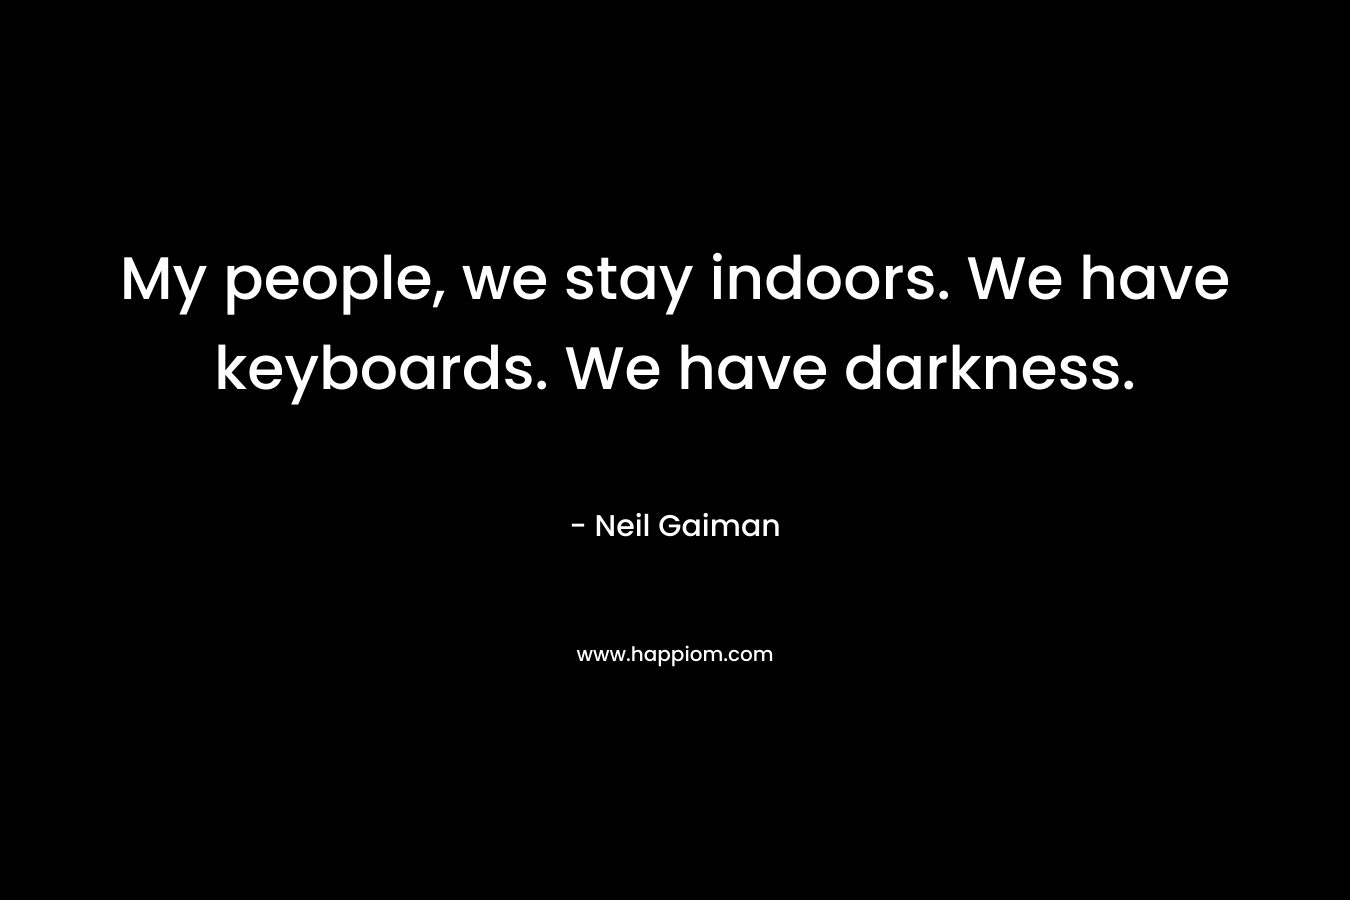 My people, we stay indoors. We have keyboards. We have darkness.